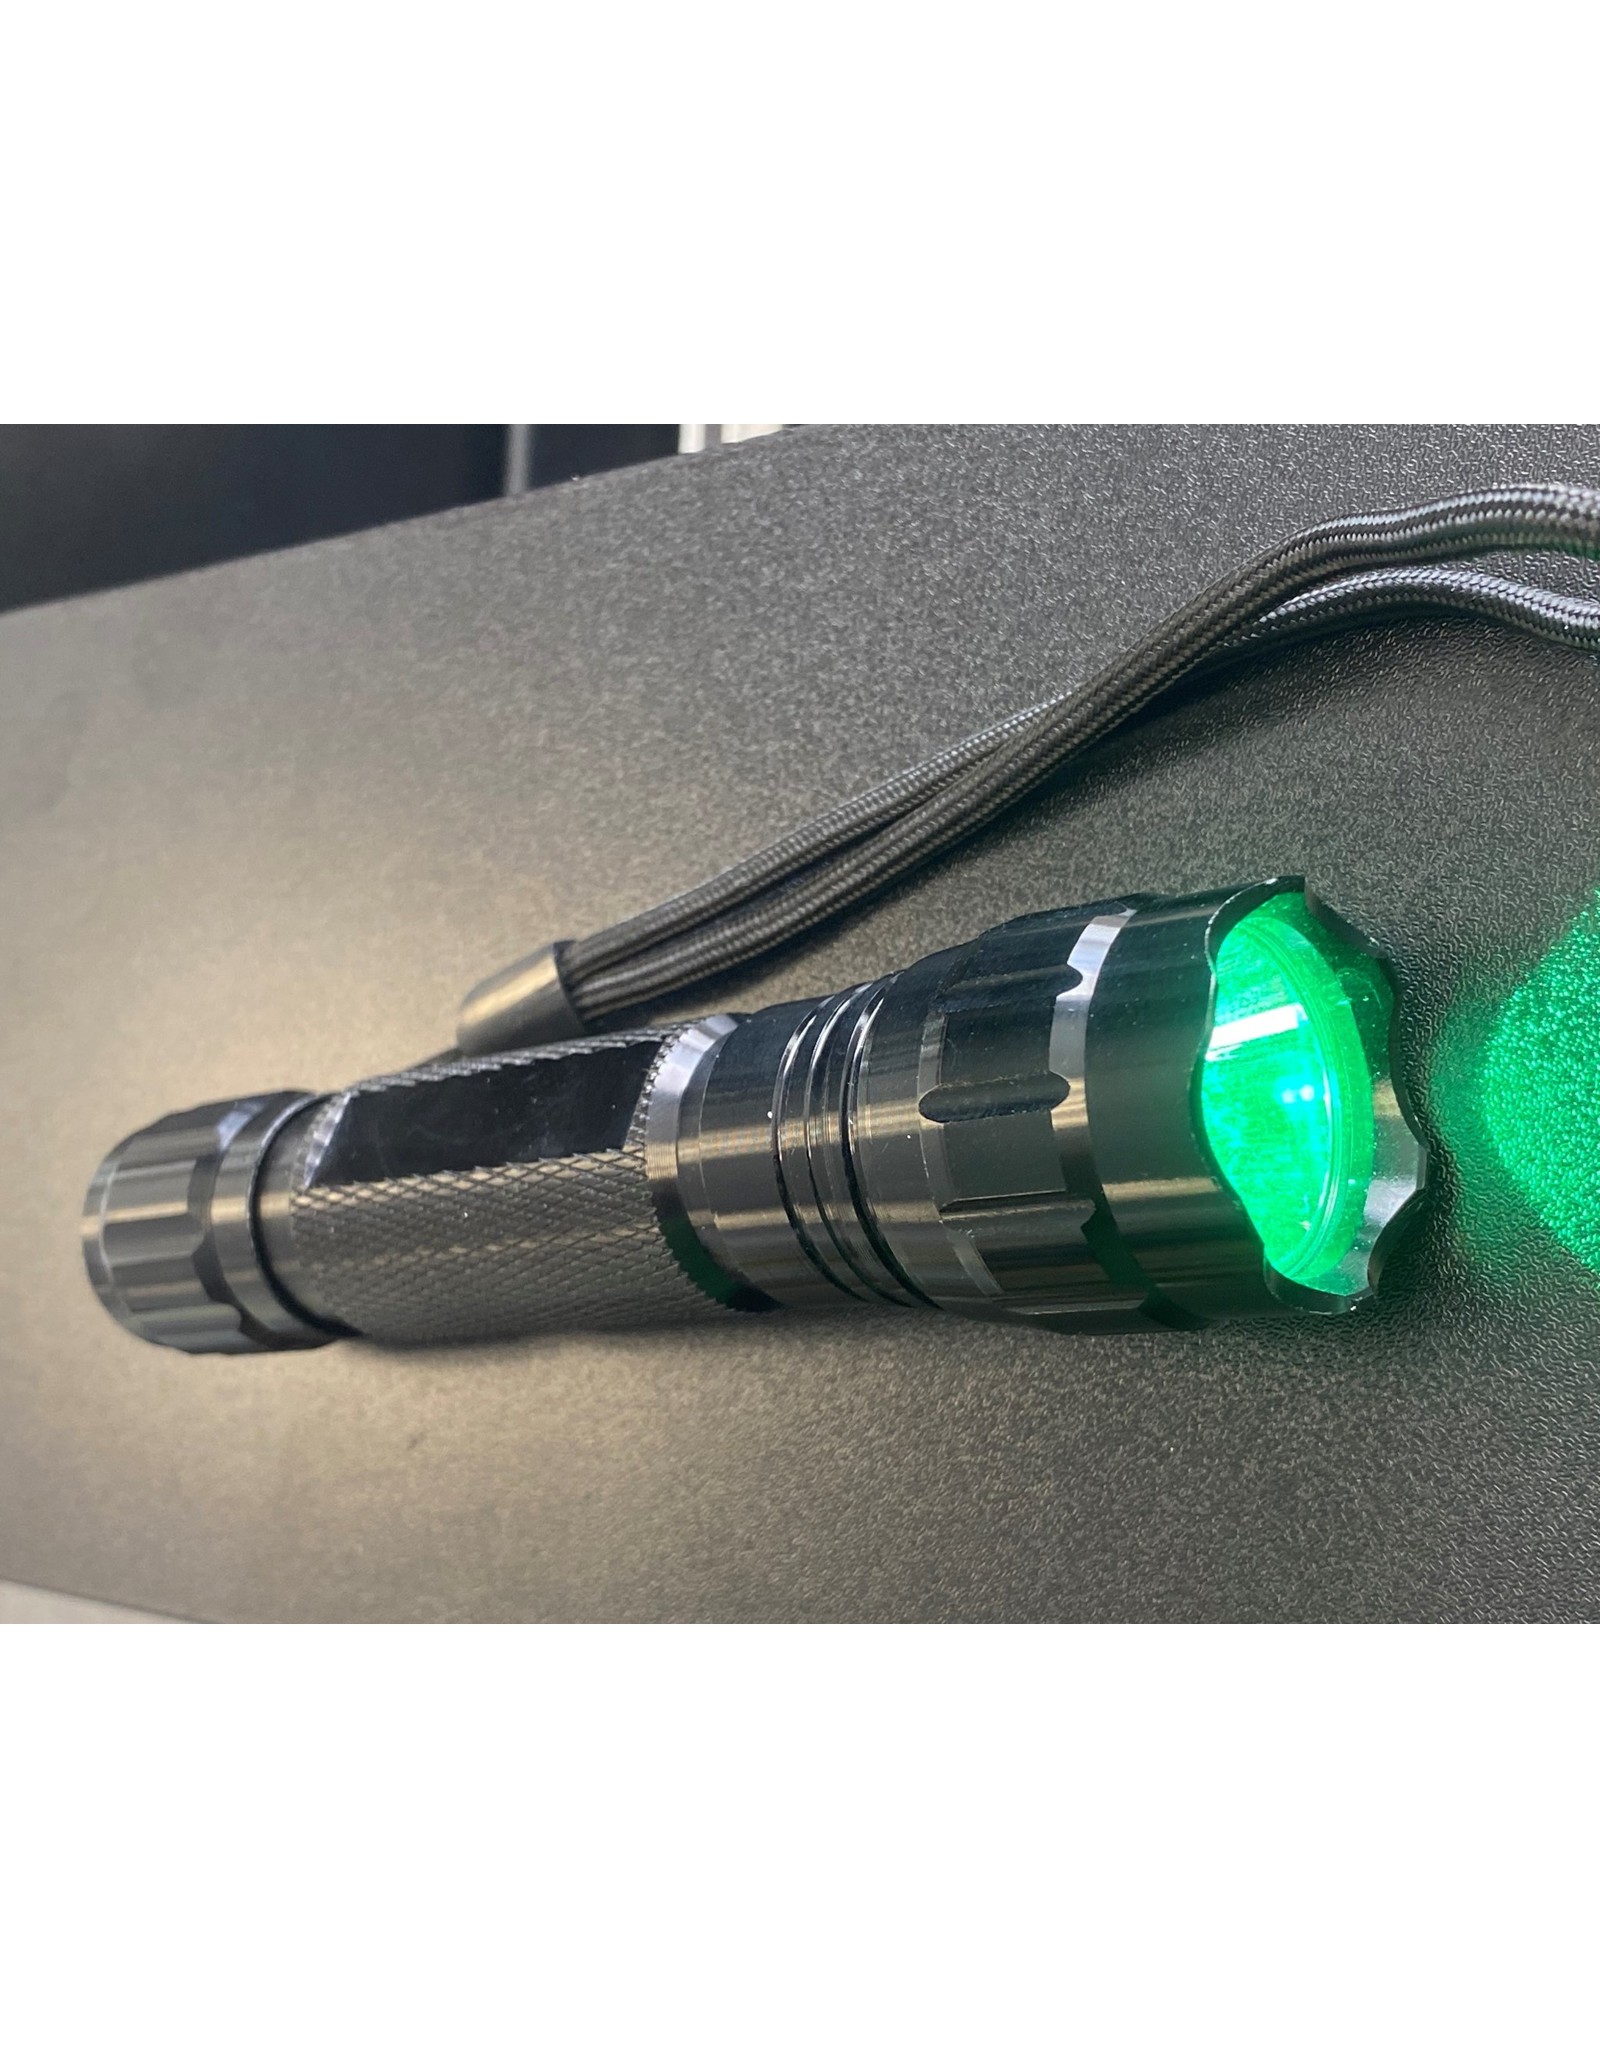 night viewer night viewer ultra bright green LED flashlight with rechargeable battery and charger